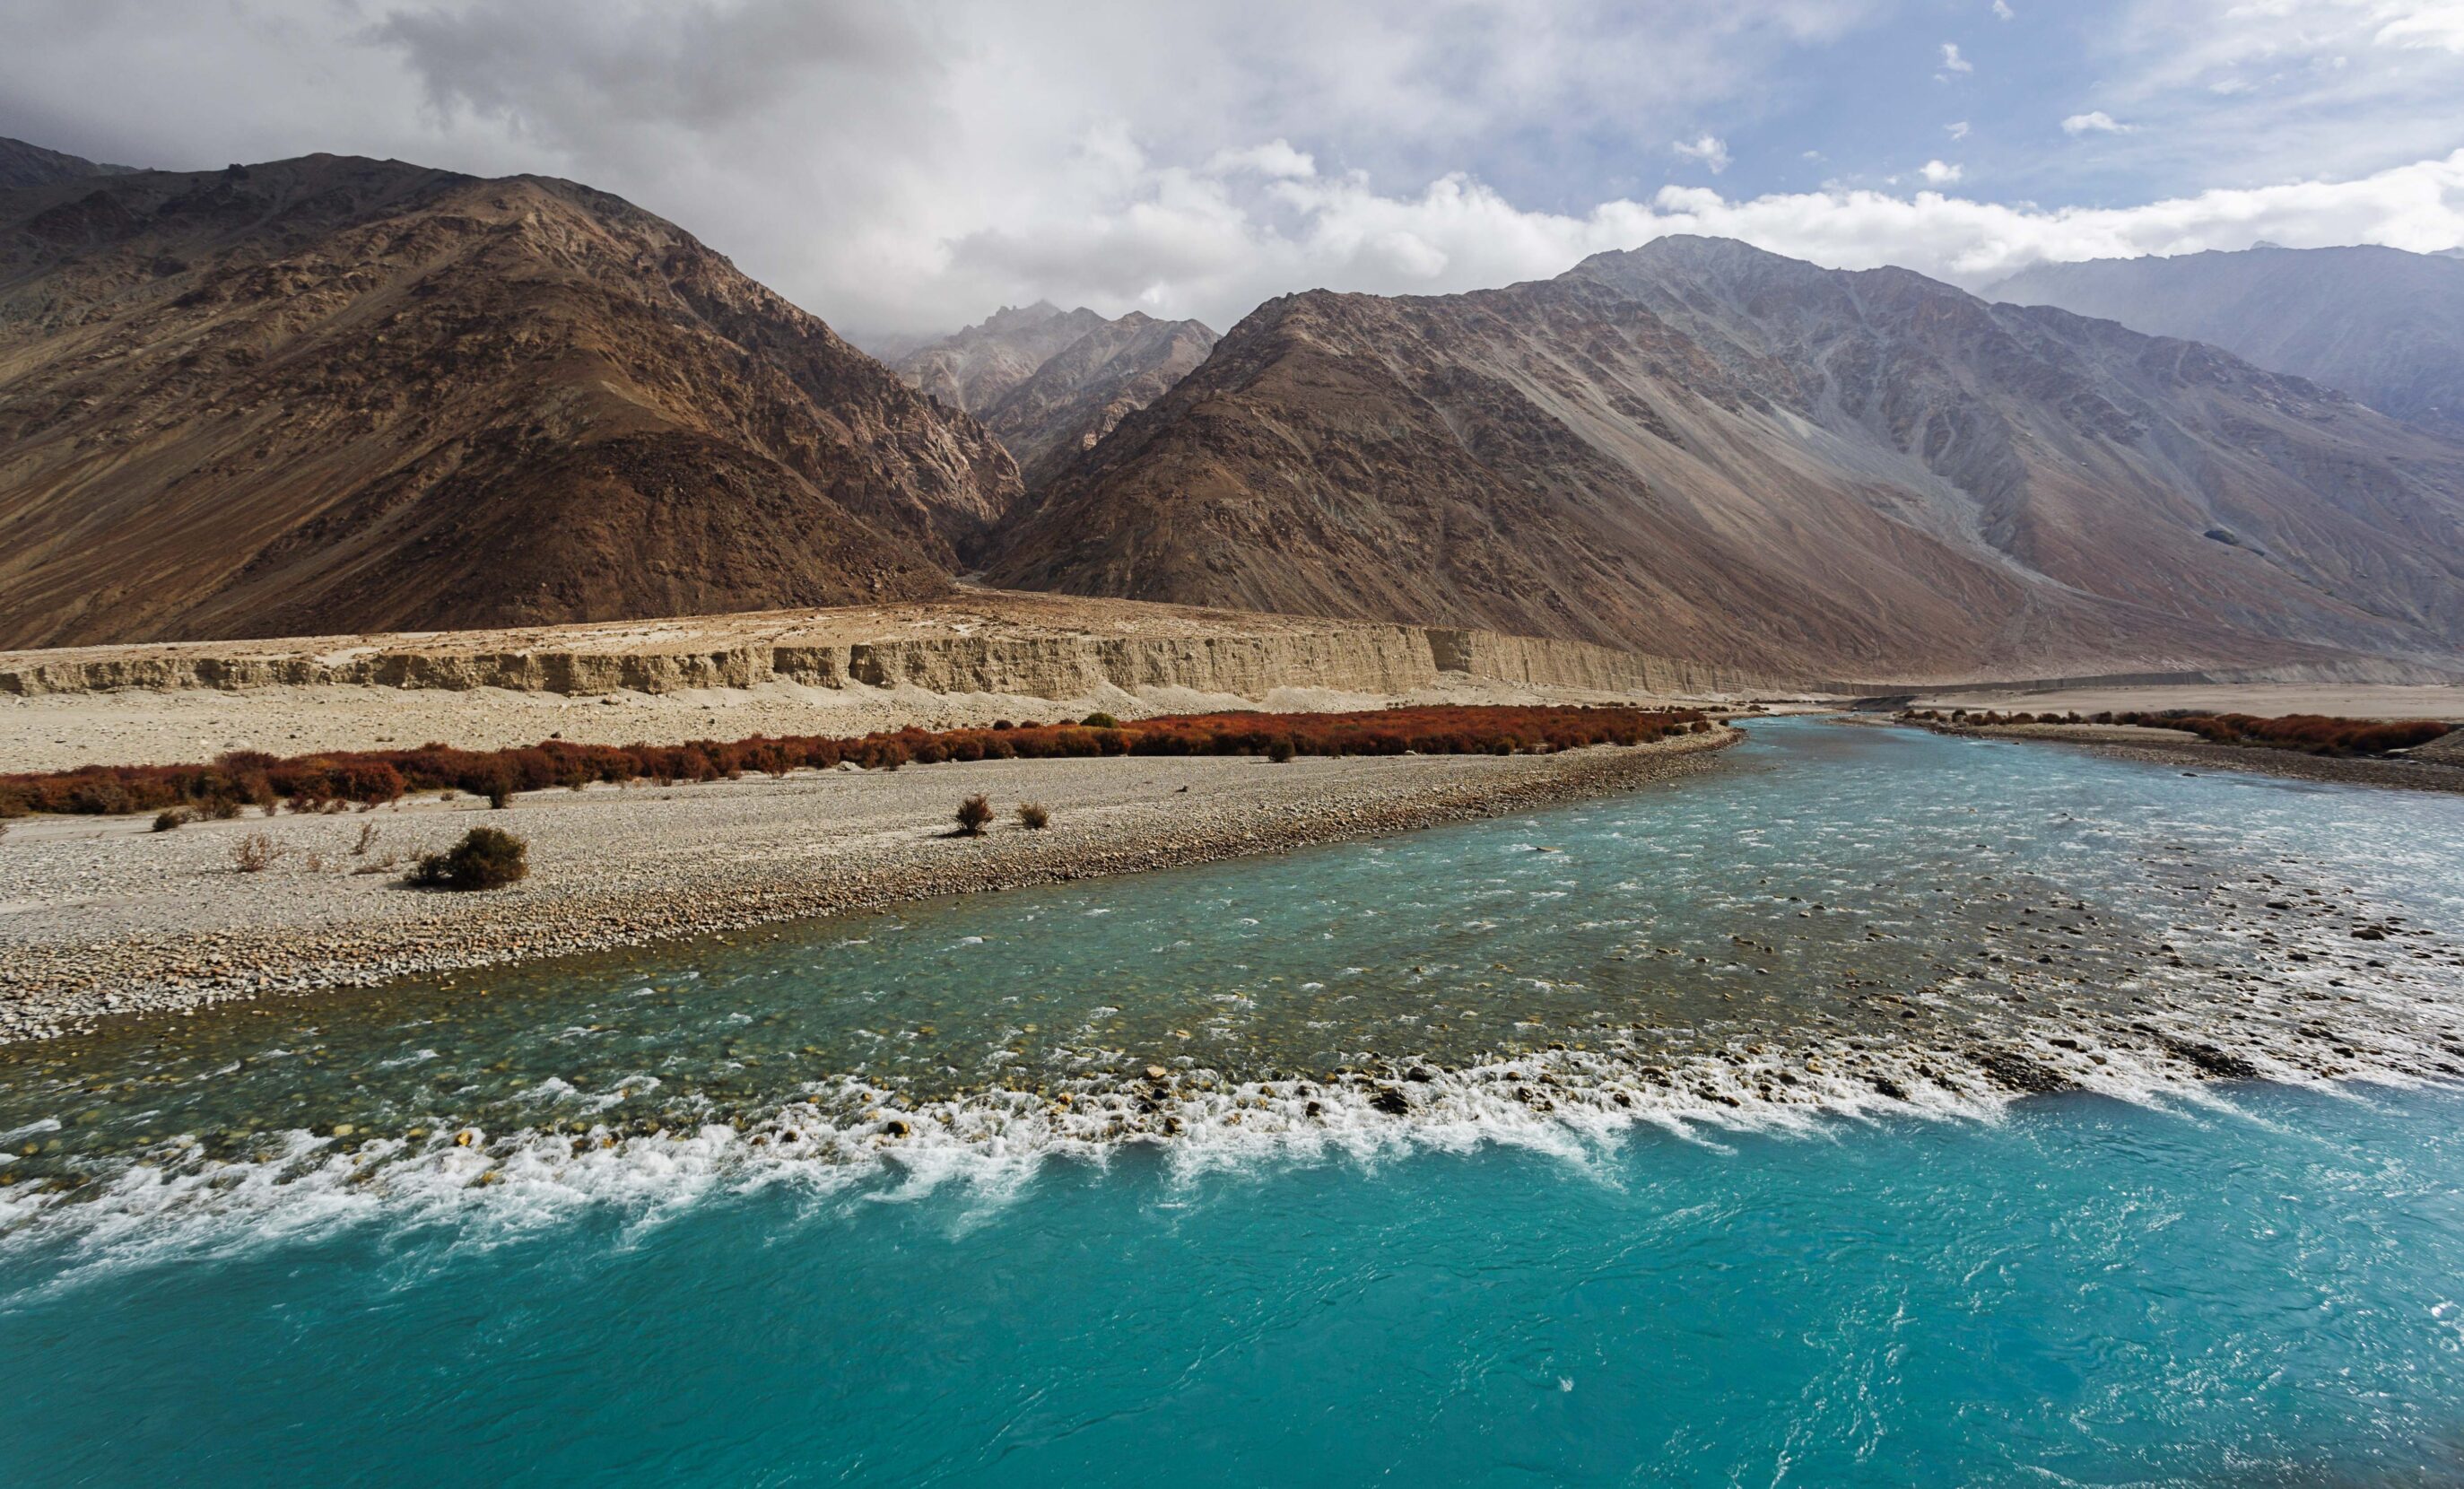 A stark, treeless mountain range stands behind the wide turquoise waters of the Indus river.